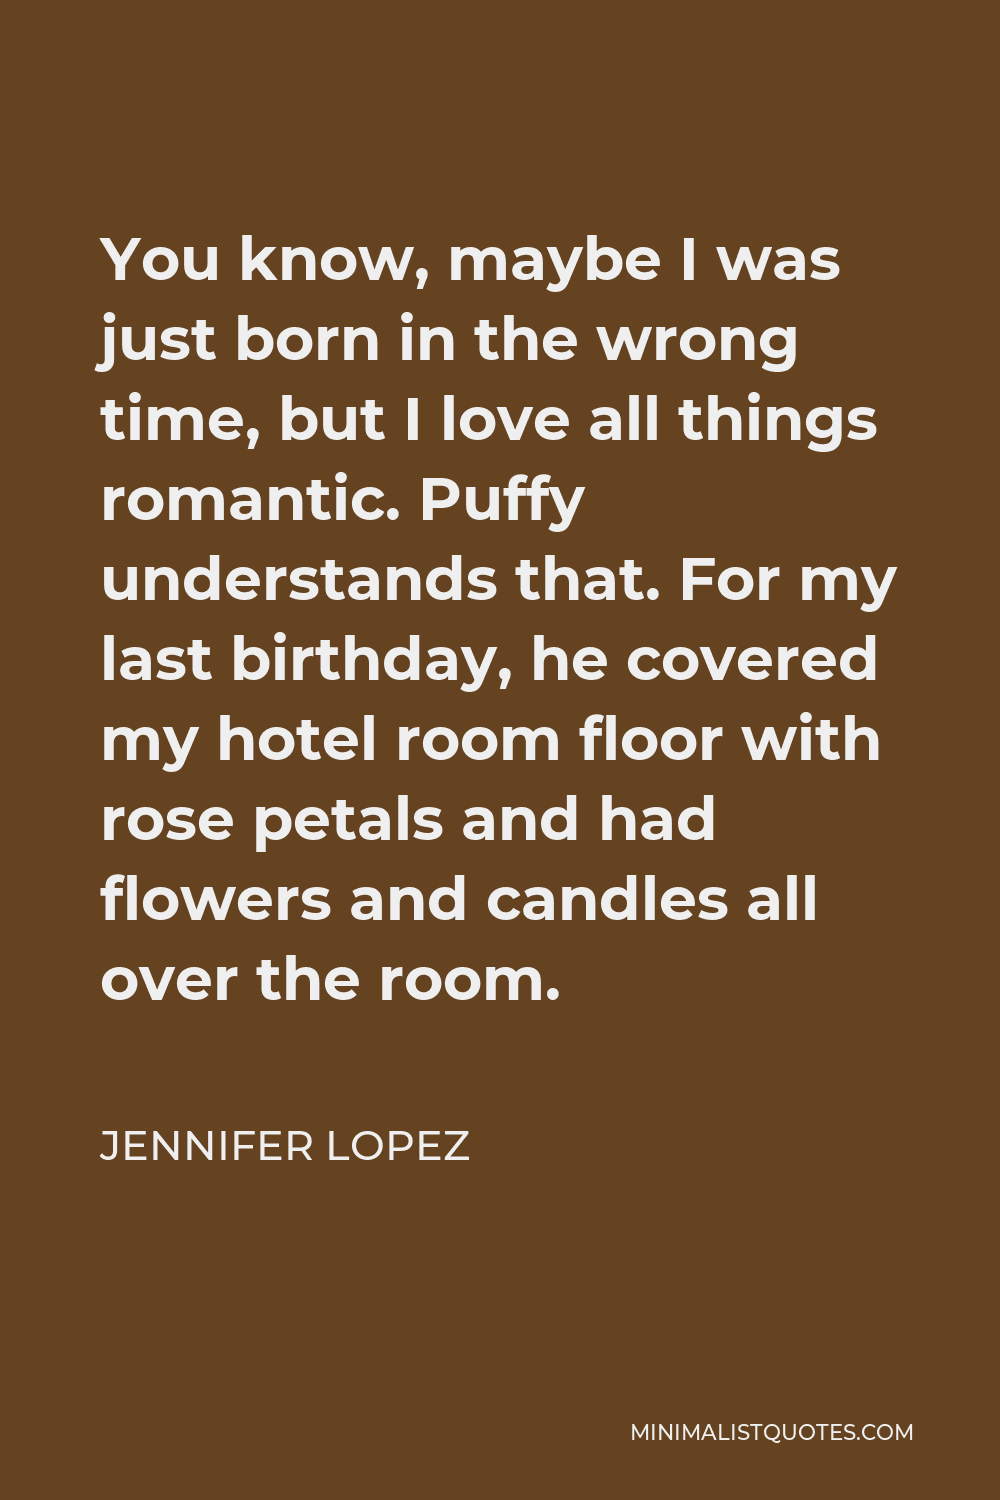 Jennifer Lopez Quote - You know, maybe I was just born in the wrong time, but I love all things romantic. Puffy understands that. For my last birthday, he covered my hotel room floor with rose petals and had flowers and candles all over the room.